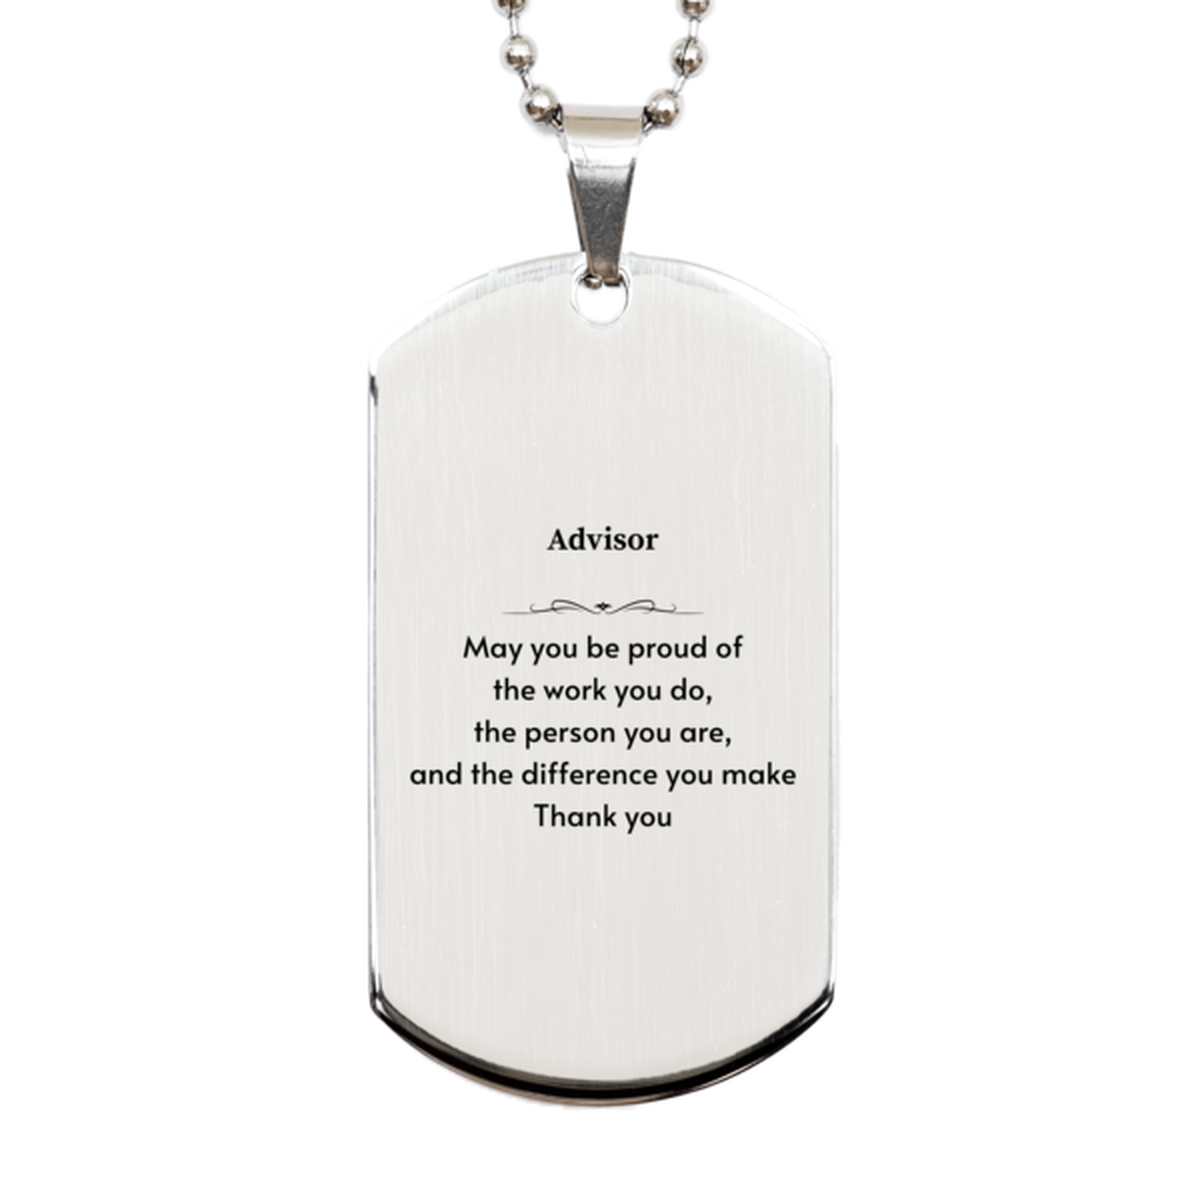 Heartwarming Silver Dog Tag Retirement Coworkers Gifts for Advisor, Advisor May You be proud of the work you do, the person you are Gifts for Boss Men Women Friends